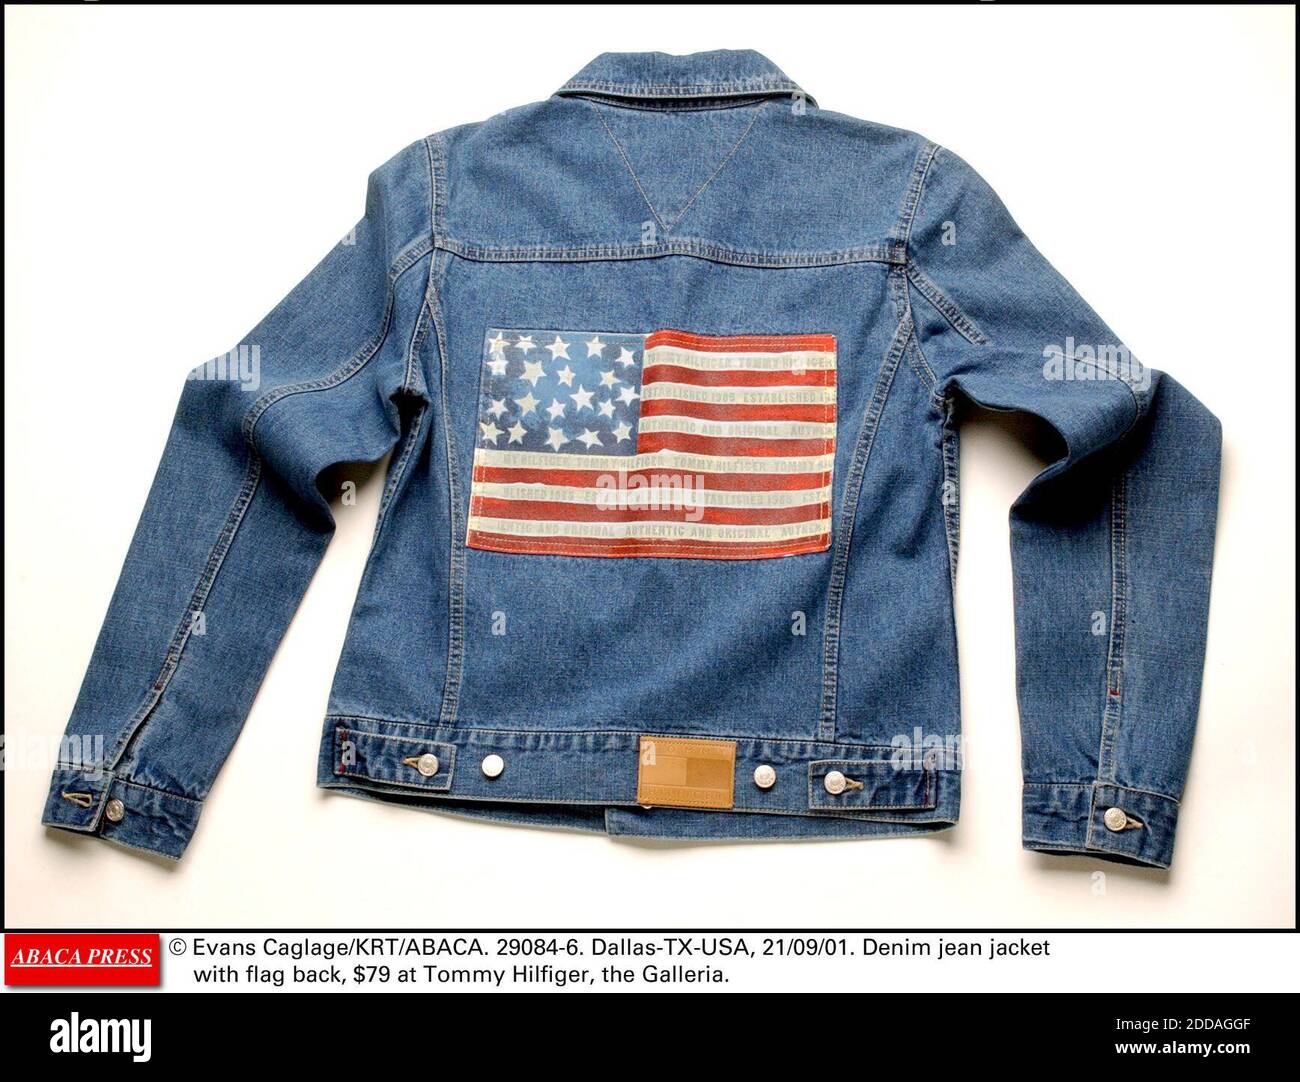 NO FILM, NO VIDEO, NO TV, NO DOCUMENTARY - © Evans Caglage/KRT/ABACA.  29084-6. Dallas-TX-USA, 21/09/01. Denim jean jacket with flag back, $79 at Tommy  Hilfiger, the Galleria Stock Photo - Alamy